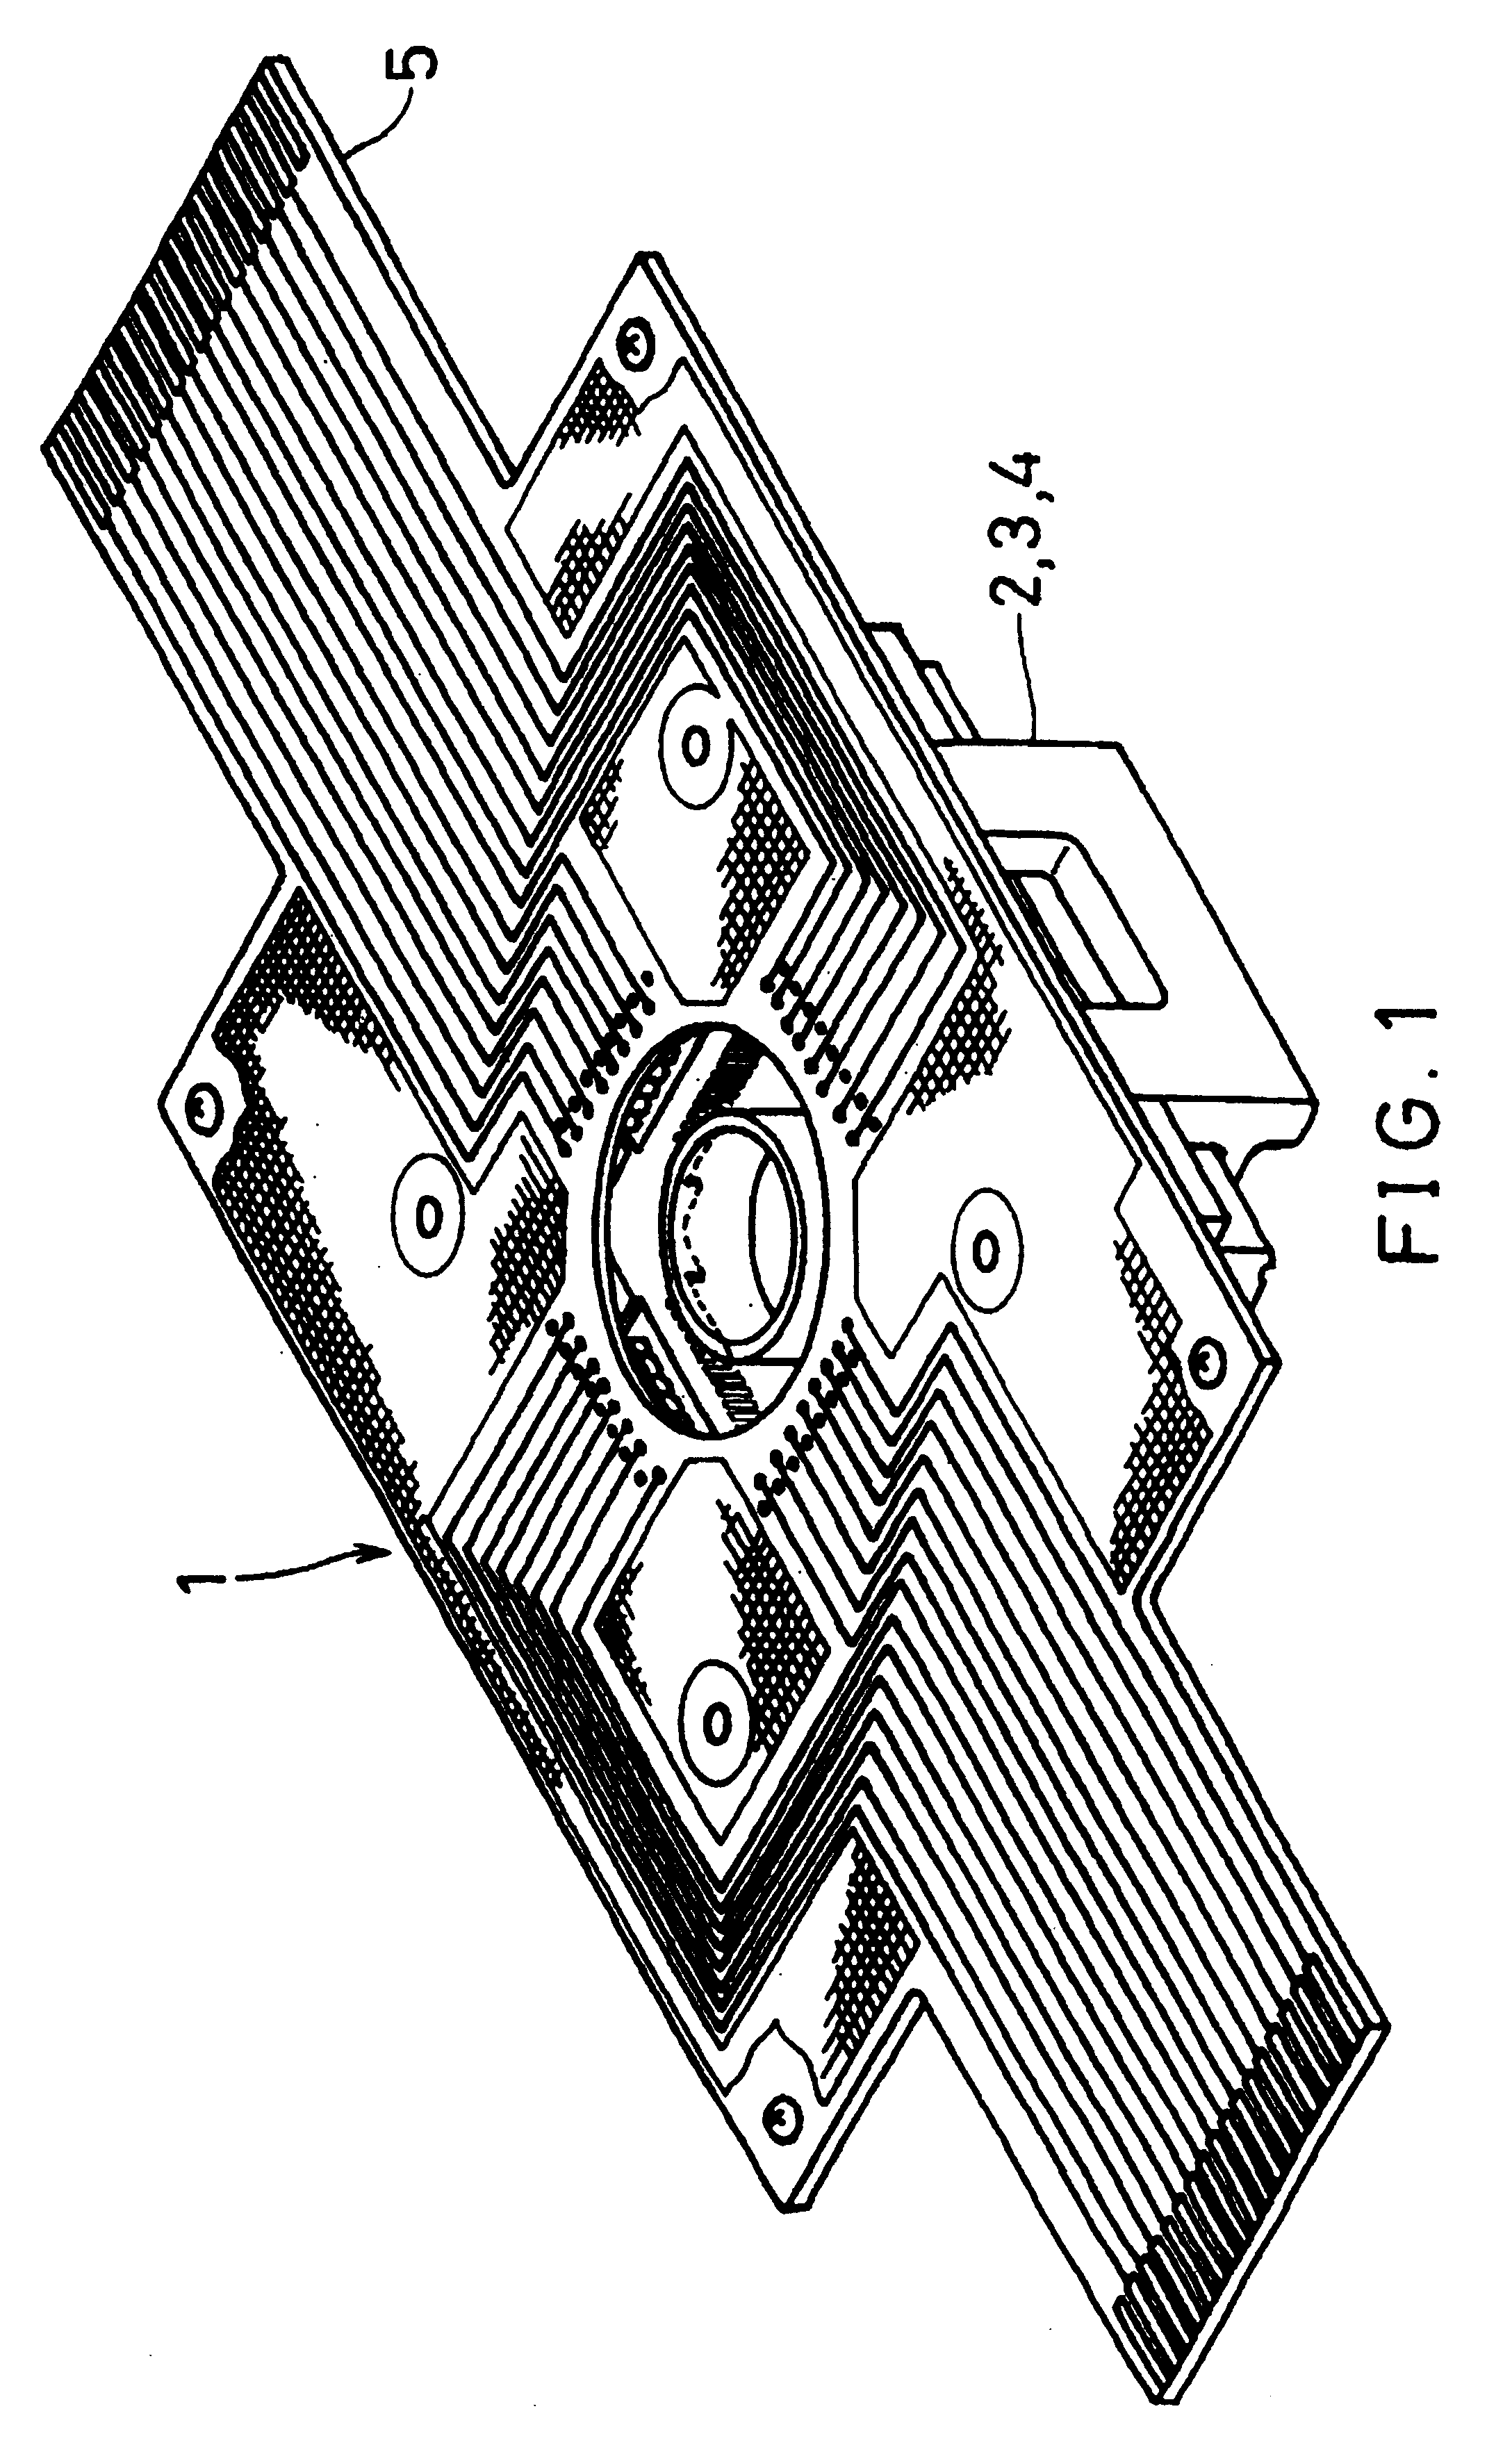 Cell potential measurement apparatus having a plurality of microelectrodes